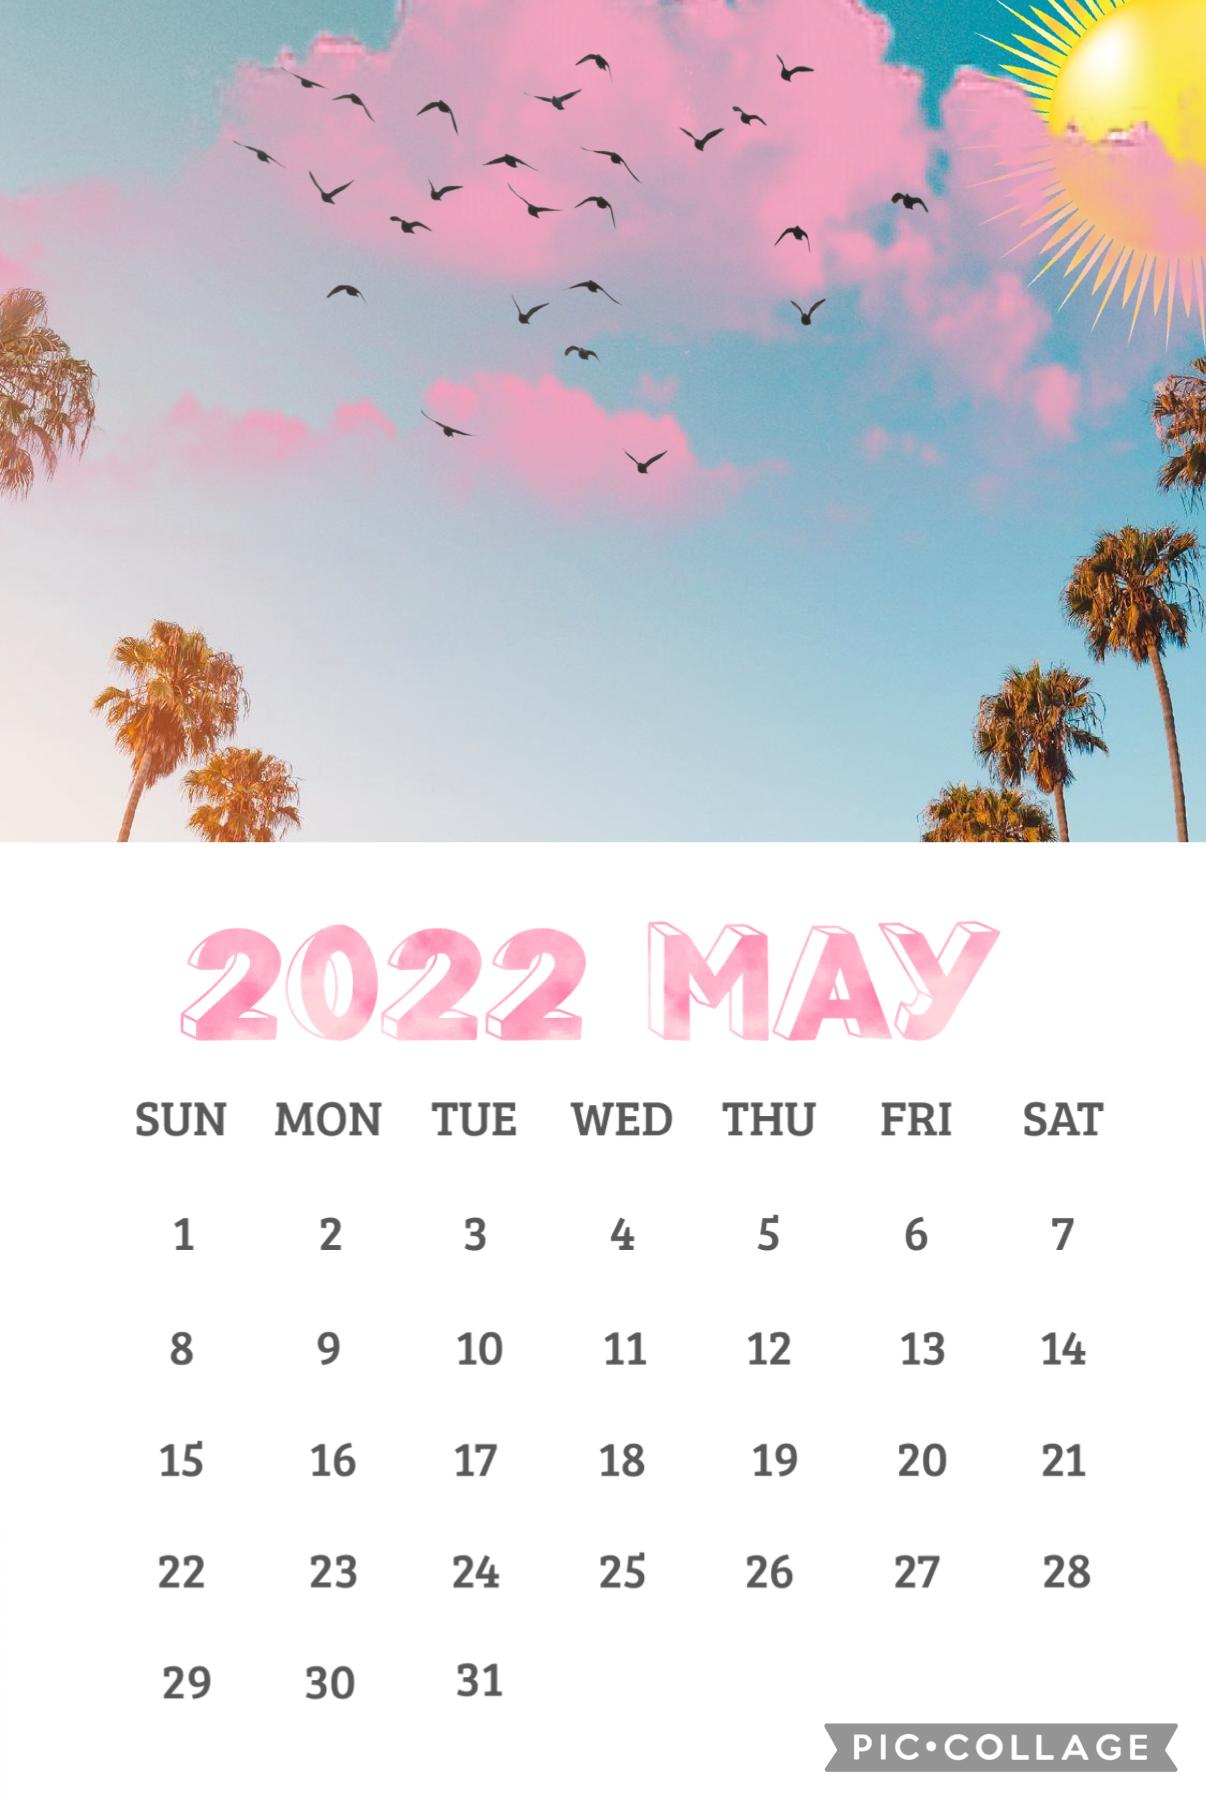 Aesthetic calendar. You can use it